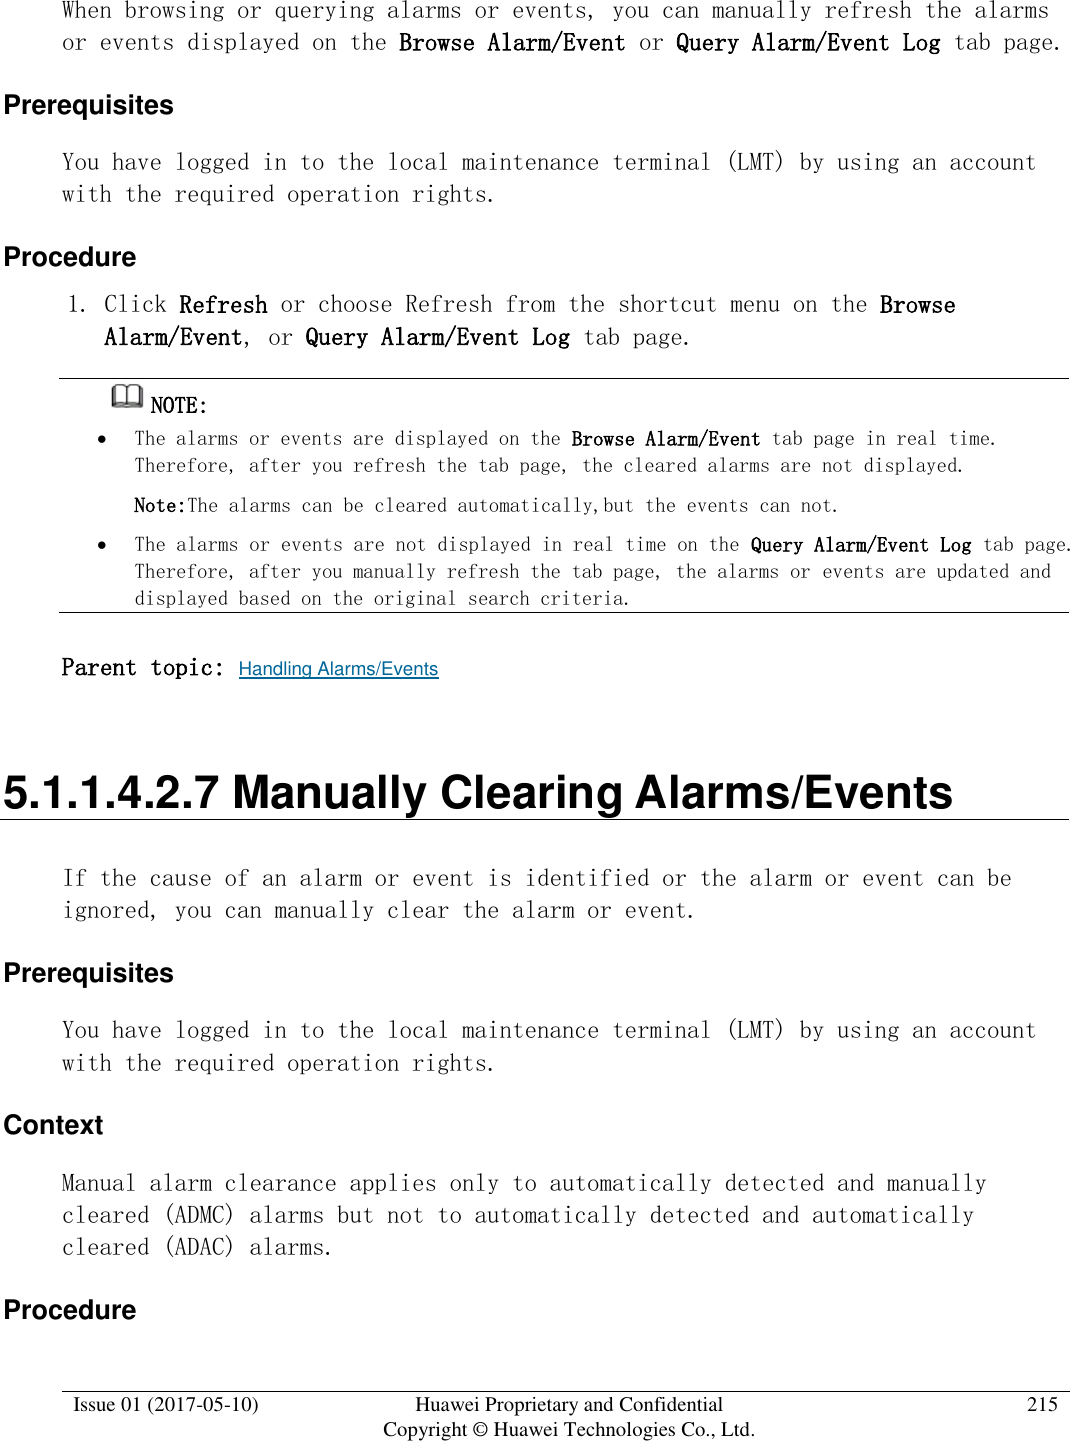  Issue 01 (2017-05-10) Huawei Proprietary and Confidential      Copyright © Huawei Technologies Co., Ltd. 215  When browsing or querying alarms or events, you can manually refresh the alarms or events displayed on the Browse Alarm/Event or Query Alarm/Event Log tab page.  Prerequisites You have logged in to the local maintenance terminal (LMT) by using an account with the required operation rights.  Procedure 1. Click Refresh or choose Refresh from the shortcut menu on the Browse Alarm/Event, or Query Alarm/Event Log tab page.  NOTE:   The alarms or events are displayed on the Browse Alarm/Event tab page in real time. Therefore, after you refresh the tab page, the cleared alarms are not displayed.  Note:The alarms can be cleared automatically,but the events can not.  The alarms or events are not displayed in real time on the Query Alarm/Event Log tab page. Therefore, after you manually refresh the tab page, the alarms or events are updated and displayed based on the original search criteria. Parent topic: Handling Alarms/Events 5.1.1.4.2.7 Manually Clearing Alarms/Events If the cause of an alarm or event is identified or the alarm or event can be ignored, you can manually clear the alarm or event.  Prerequisites You have logged in to the local maintenance terminal (LMT) by using an account with the required operation rights.  Context Manual alarm clearance applies only to automatically detected and manually cleared (ADMC) alarms but not to automatically detected and automatically cleared (ADAC) alarms. Procedure 